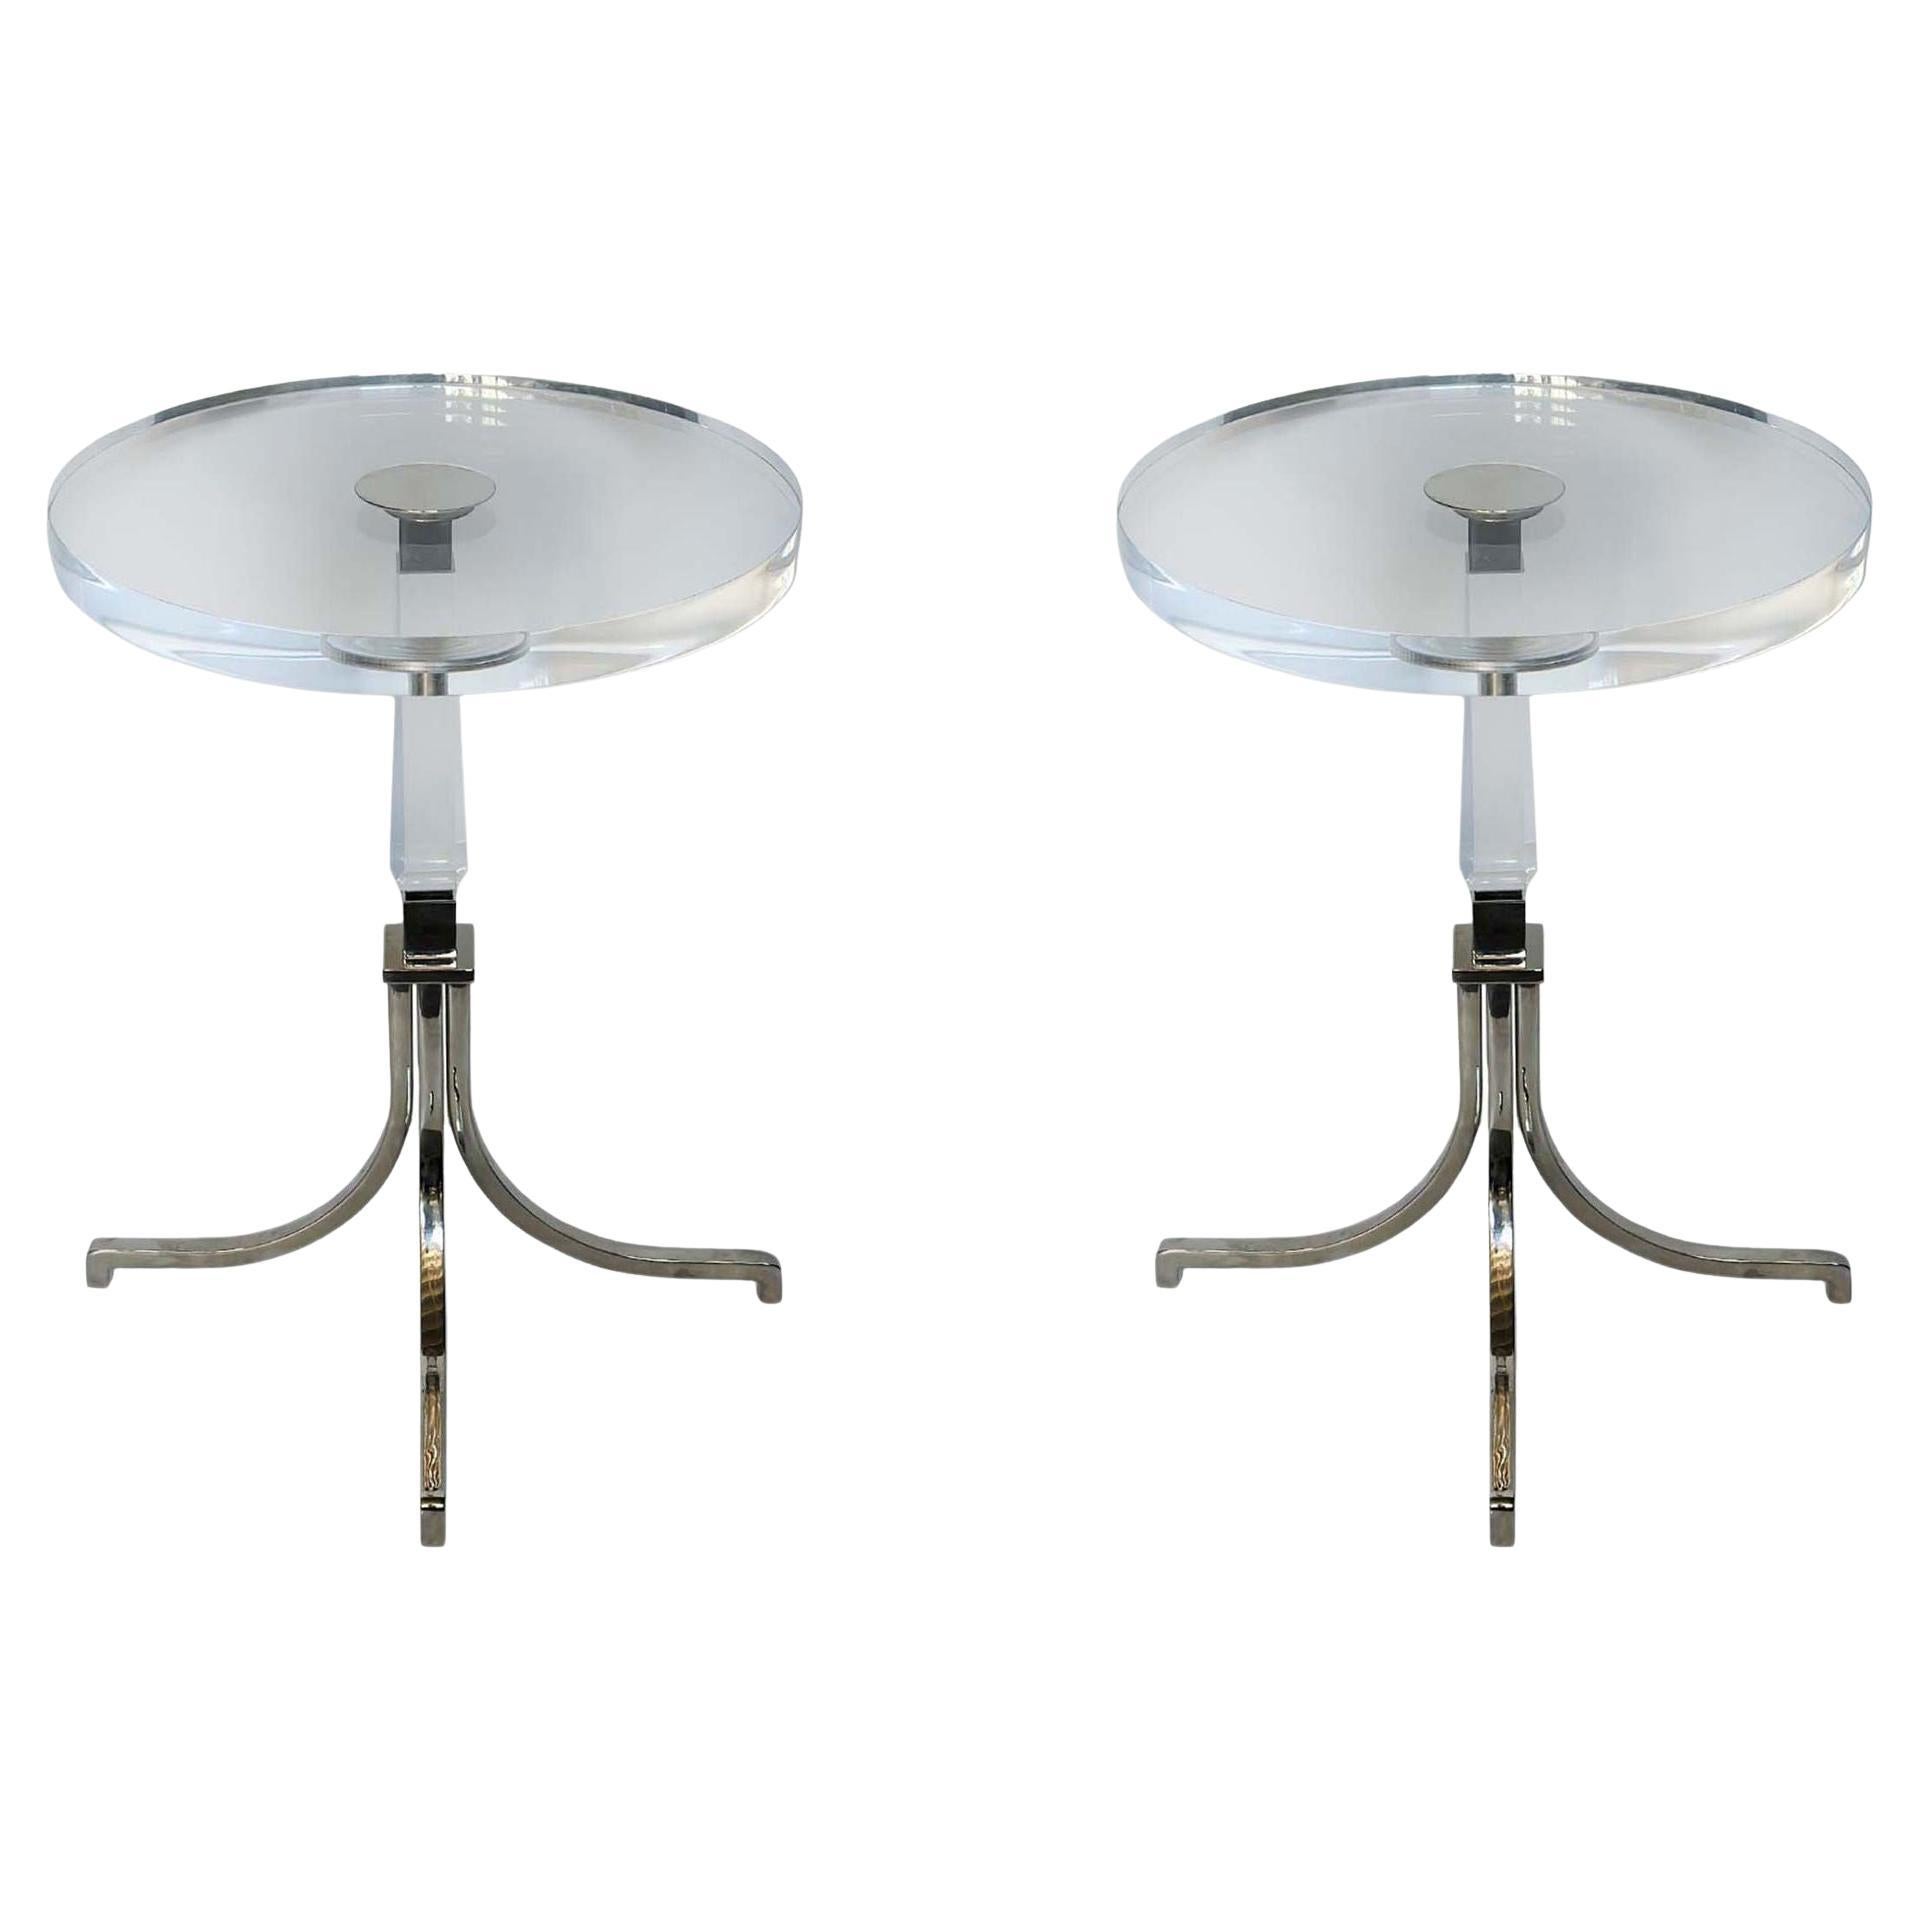 Pair of Round Lucite and Chrome Side Tables by Charles Hollis Jones, c. 1970's For Sale